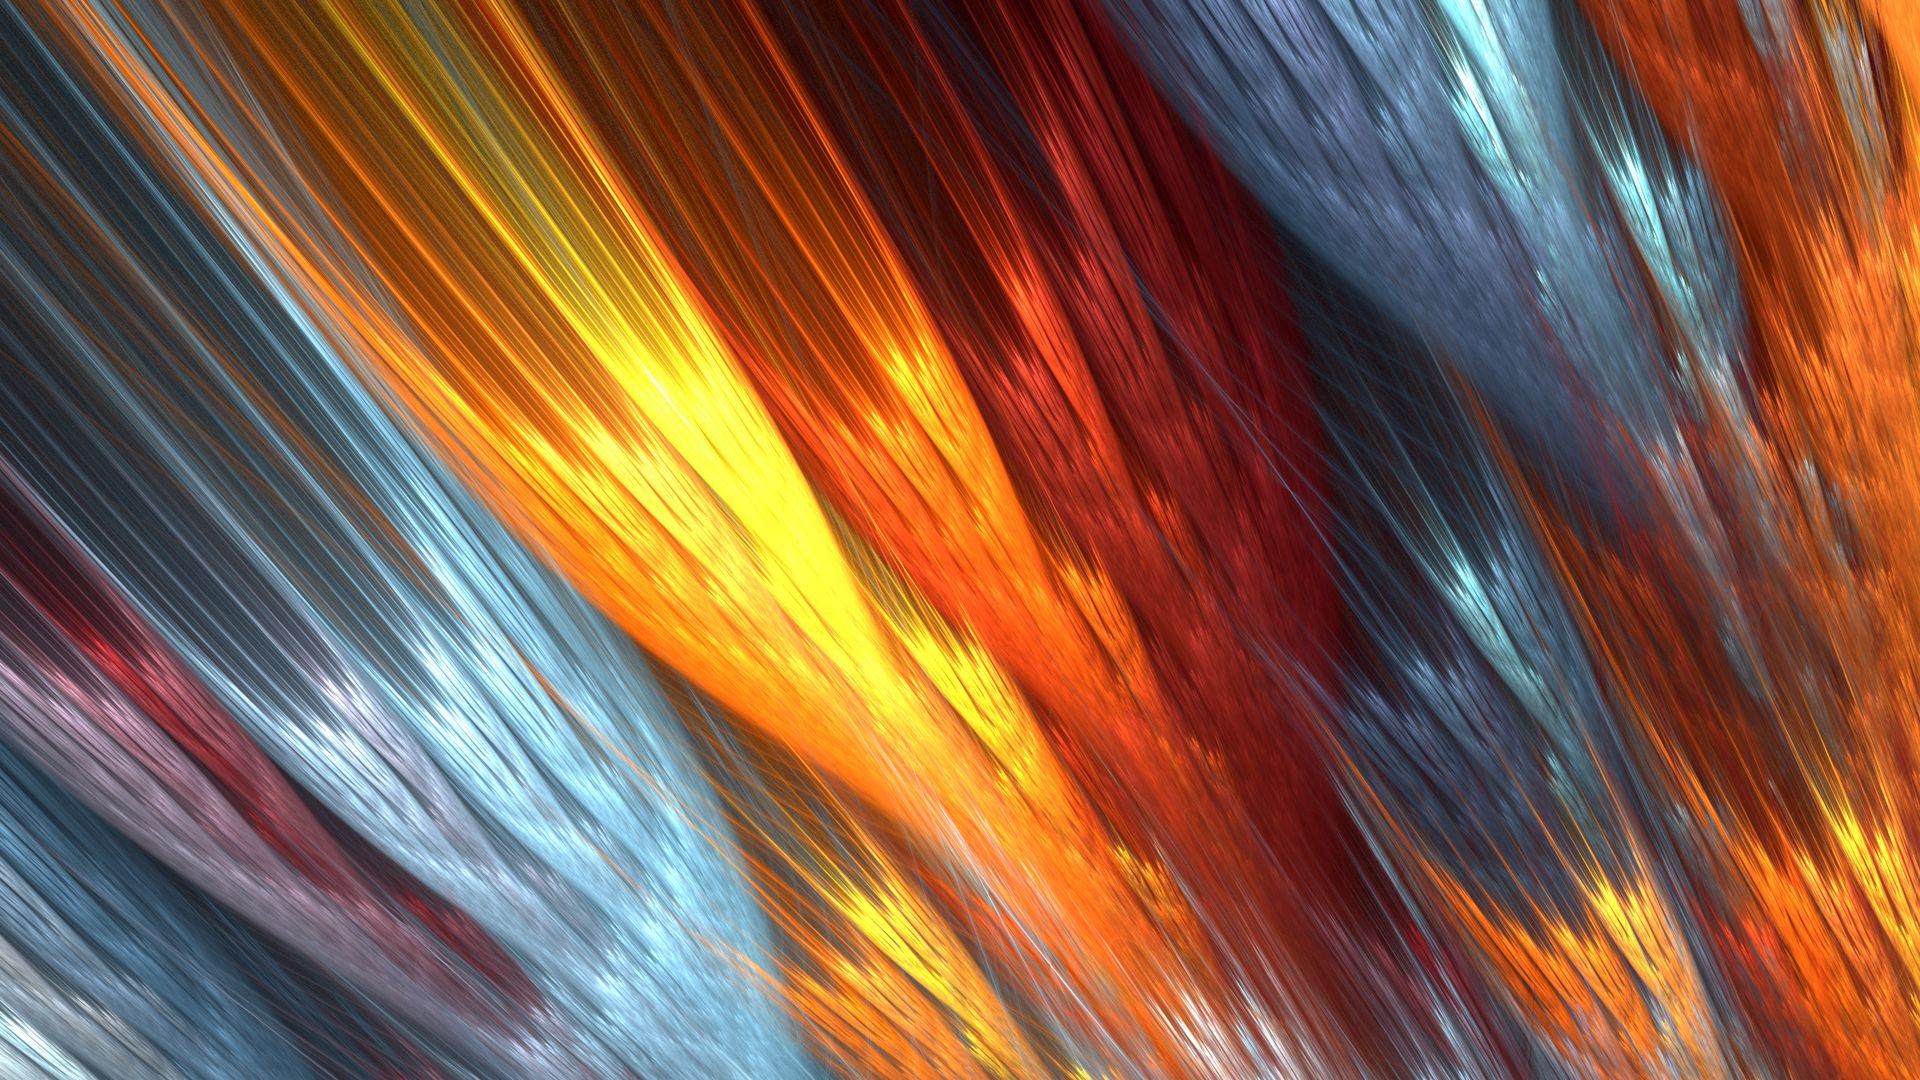 Abstract Fire Fractals Hd Wallpaper - Abstract Fire Fractal Hd - HD Wallpaper 